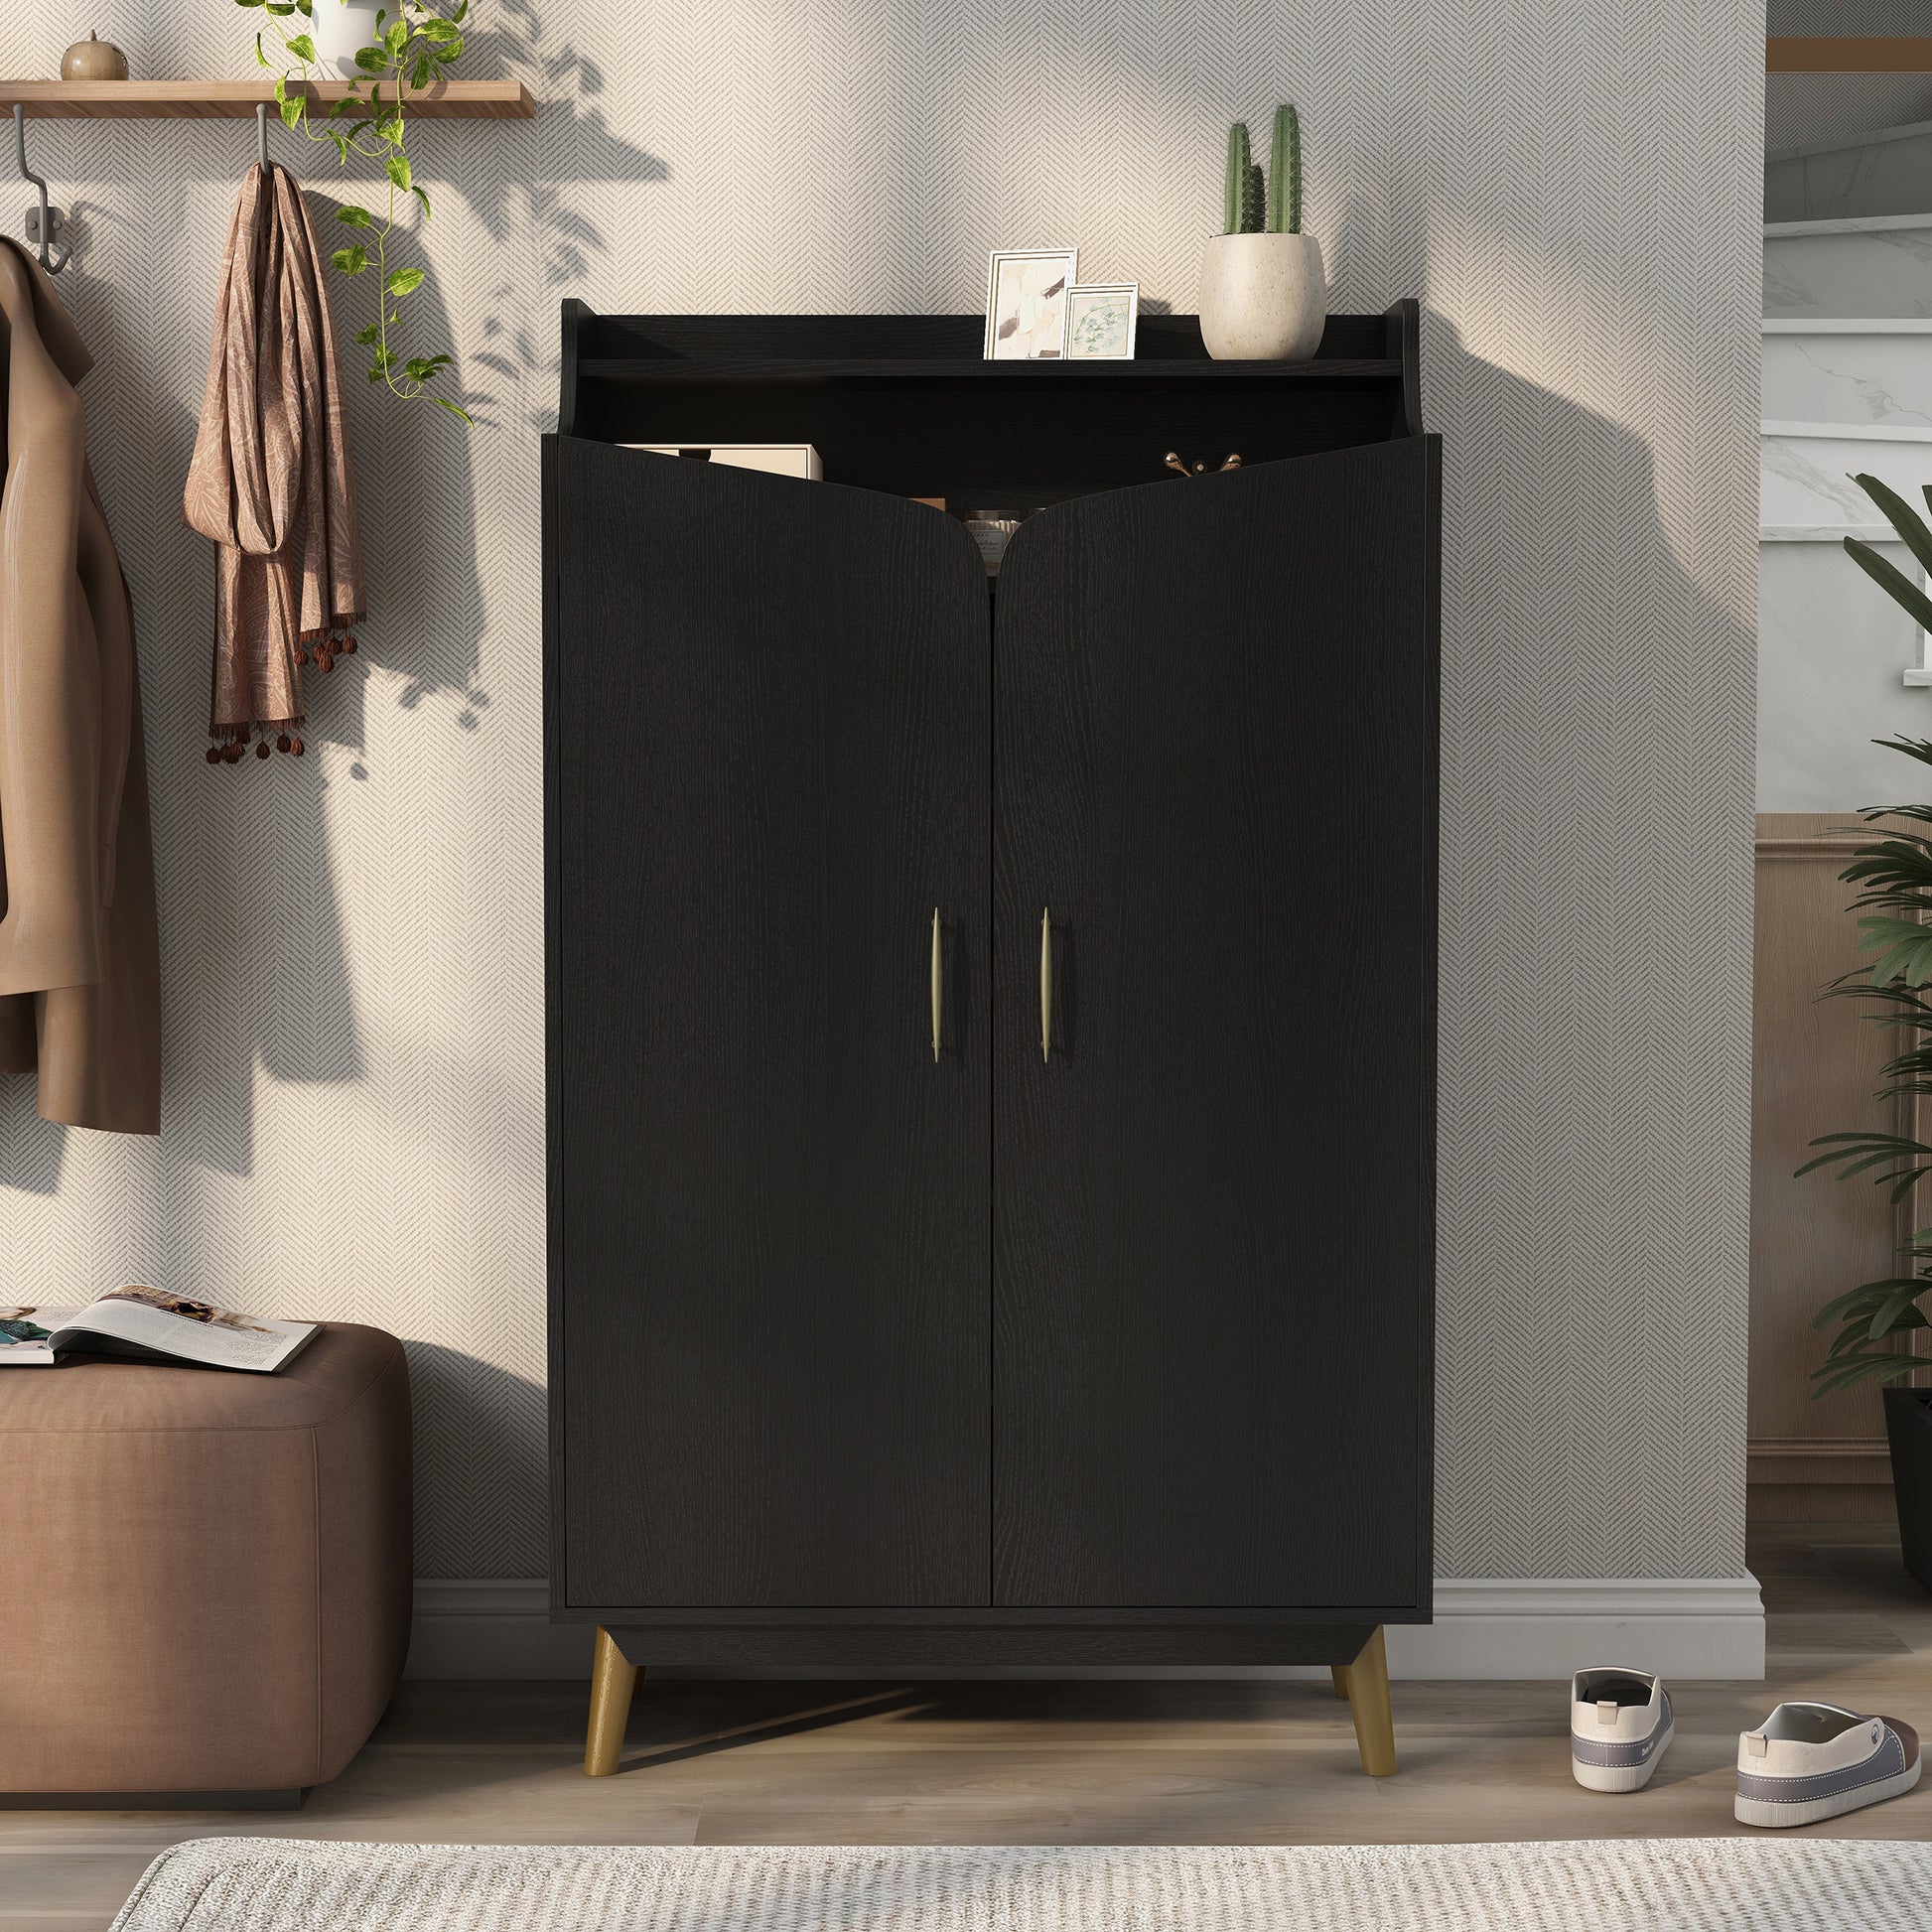 Front-facing transitional black and gold two-door 14-pair shoe cabinet in an entryway with accessories